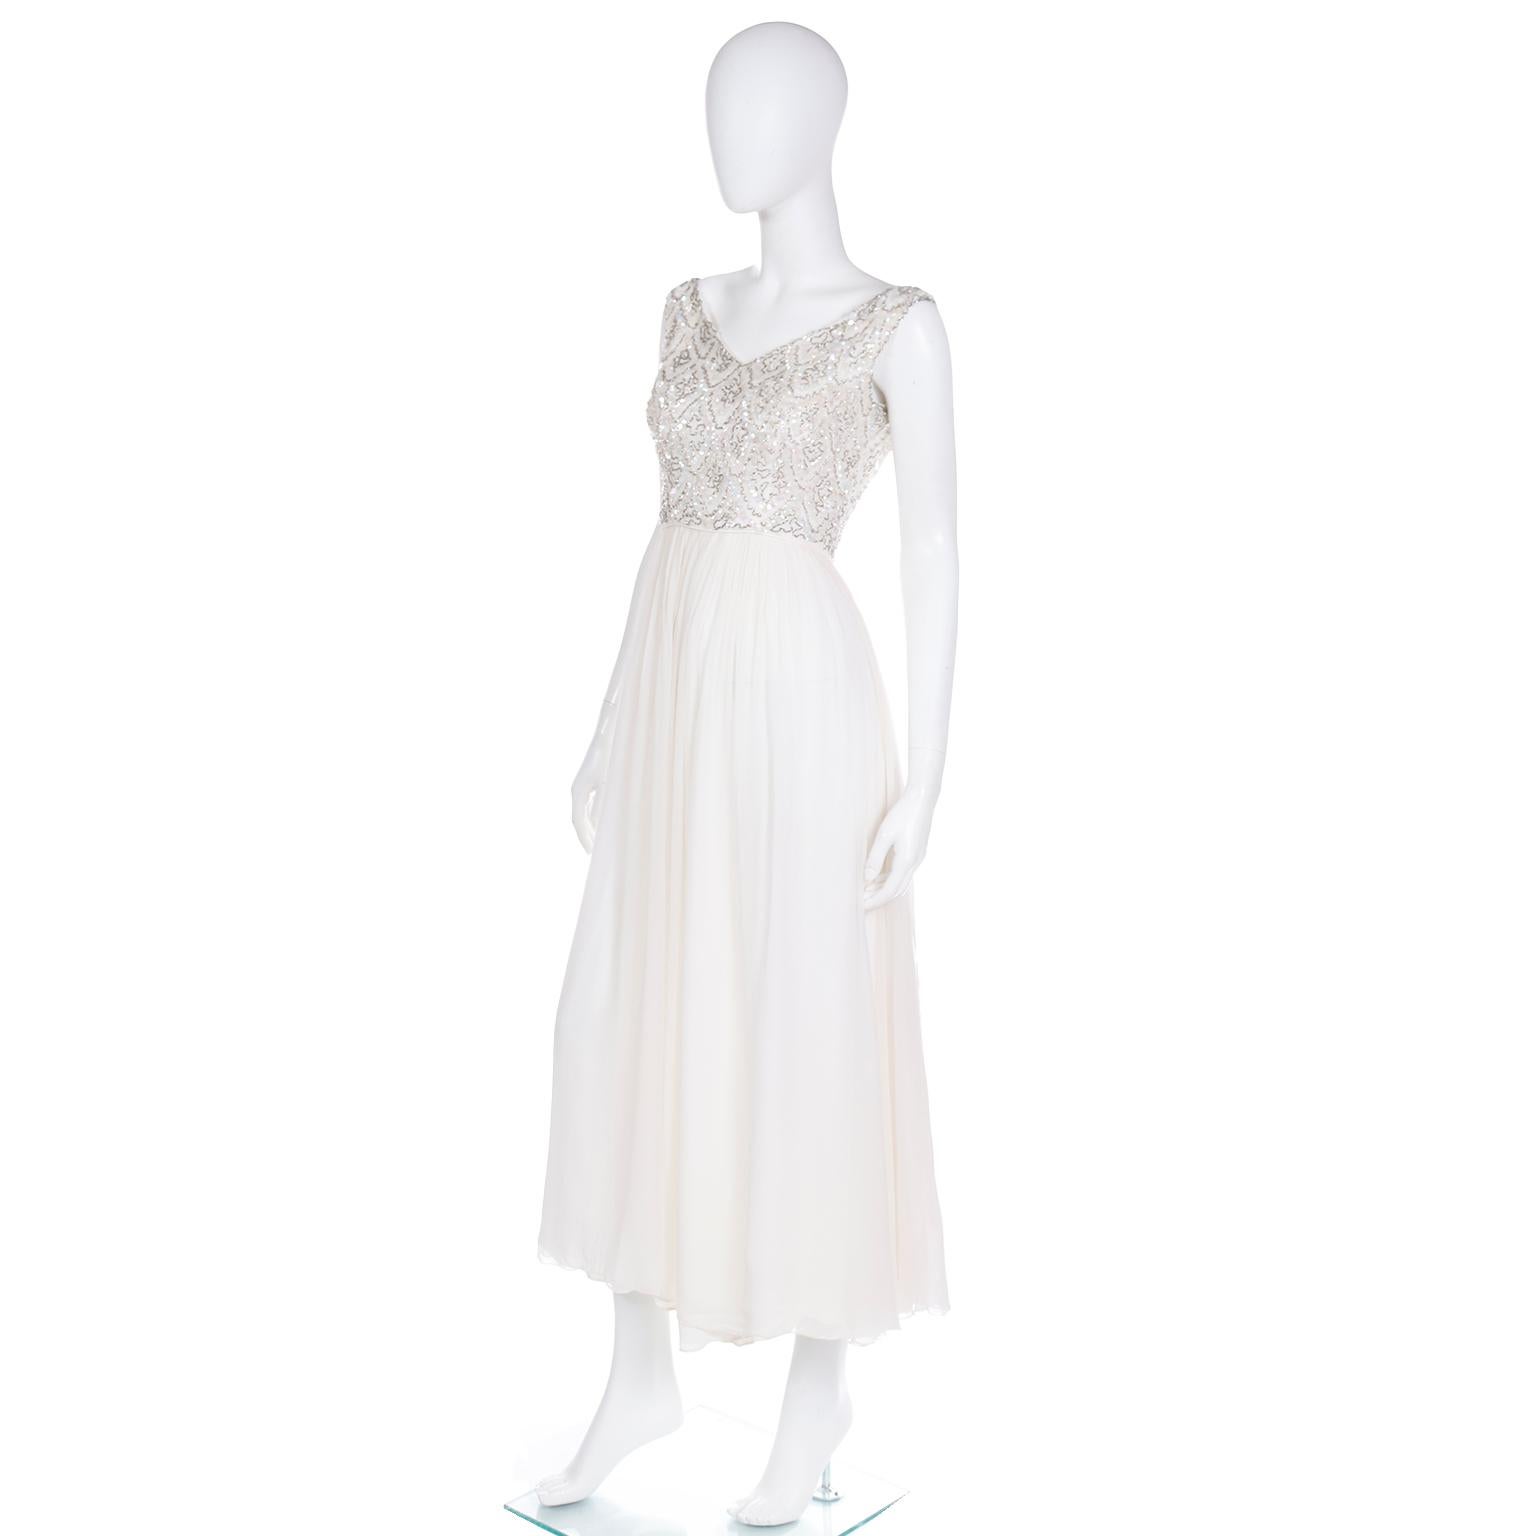 1960s White Silk Chiffon Evening Dress With Silver Beads and Iridescent Sequins For Sale 1